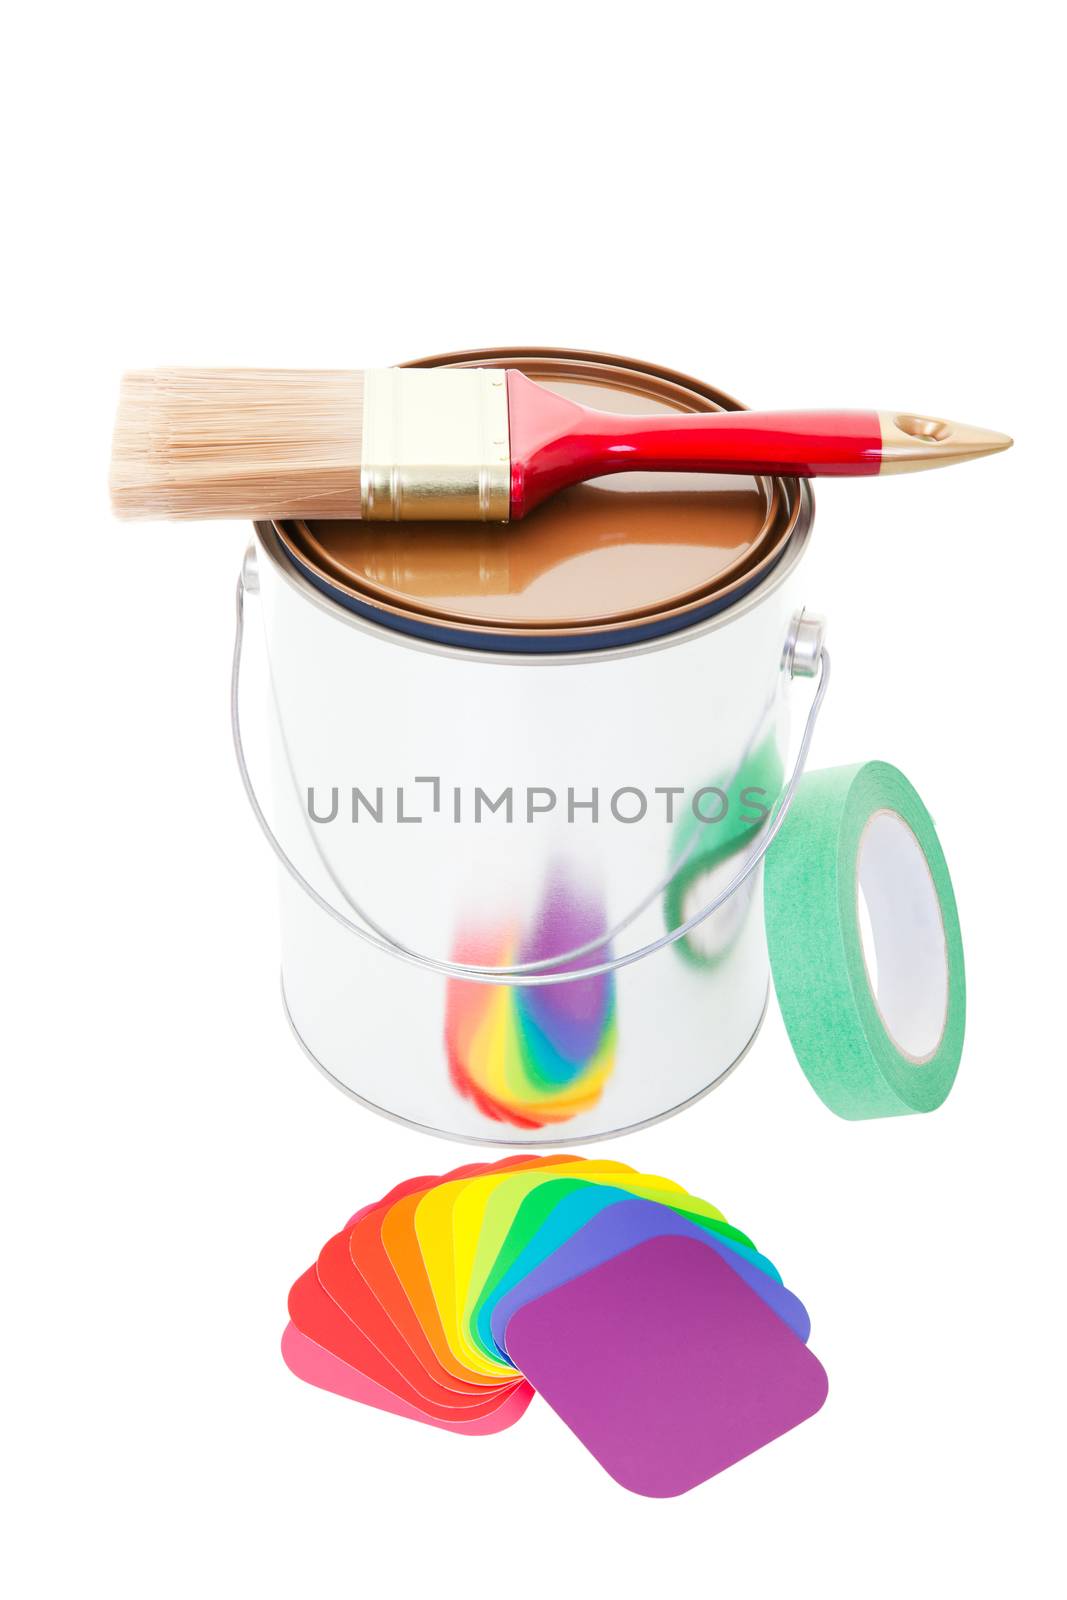 A paint can with a brush on top and painter's tape and an array of colorful paint chips beside.  Shot on white background.